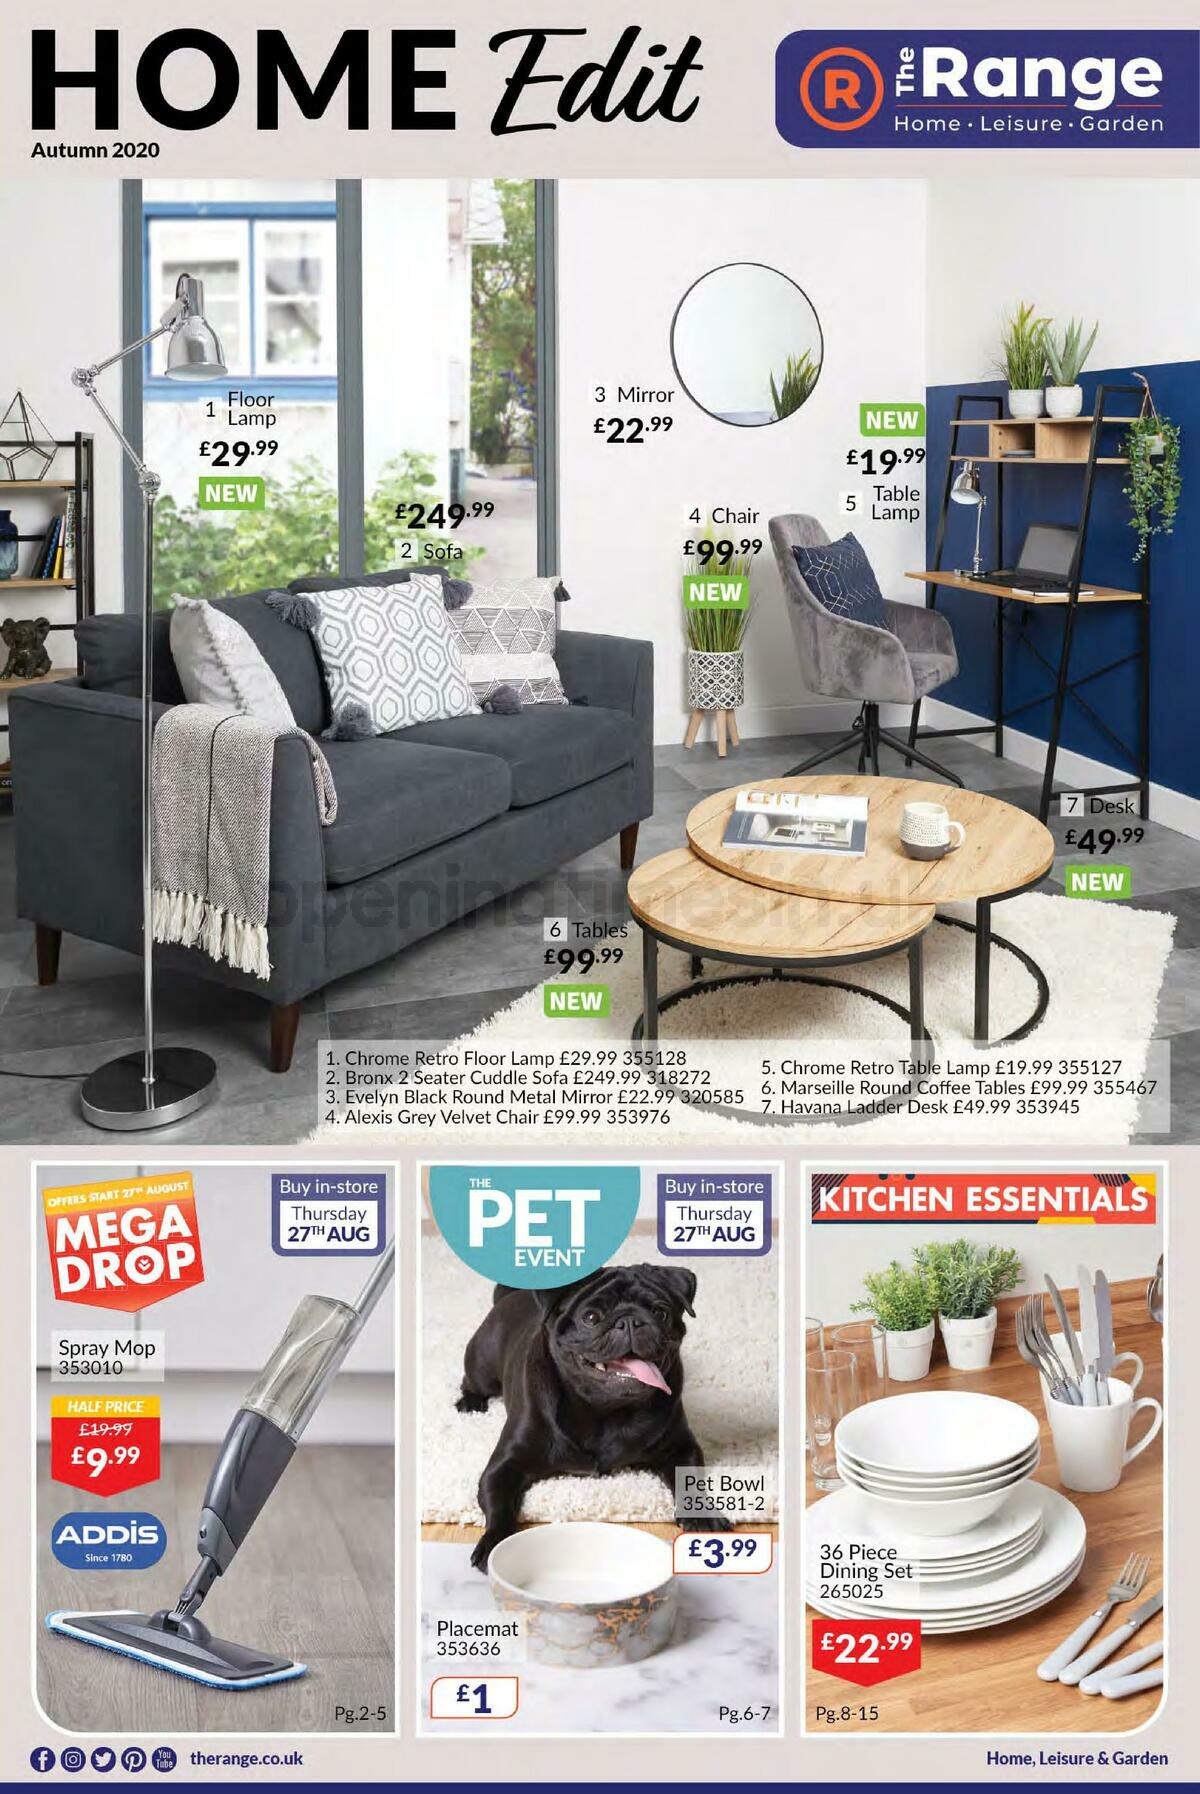 The Range Home Edit Offers from 26 August